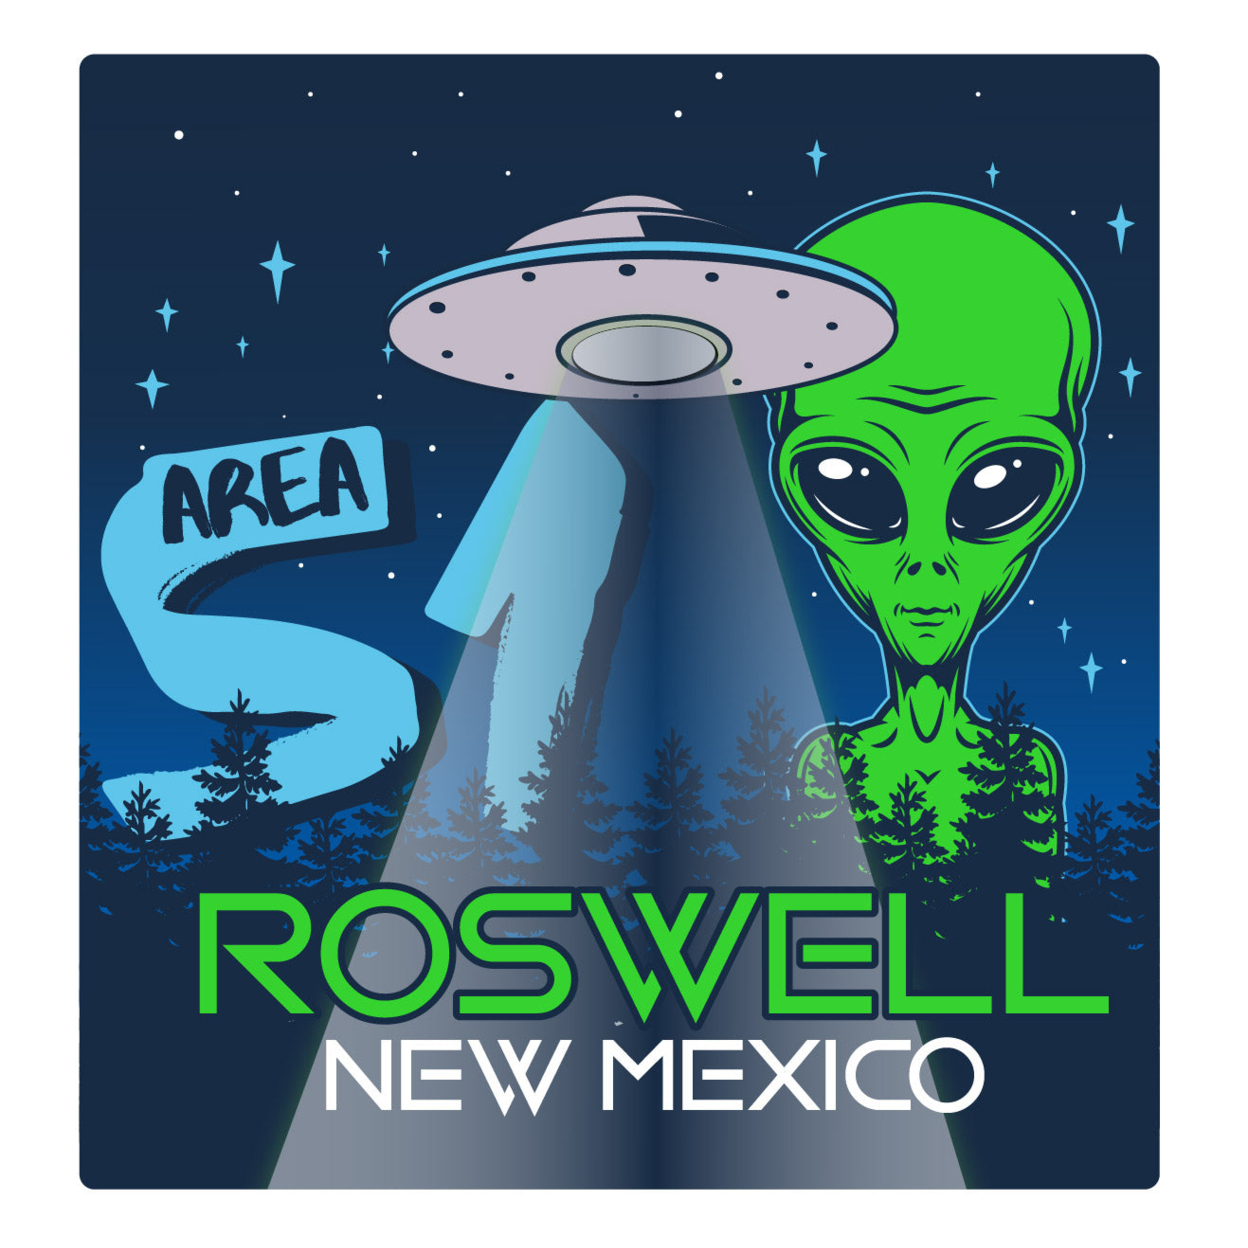 Roswell New Mexico Souvenir UFO Spaceship Area 51 Alien Decal Sticker - 2 Inch